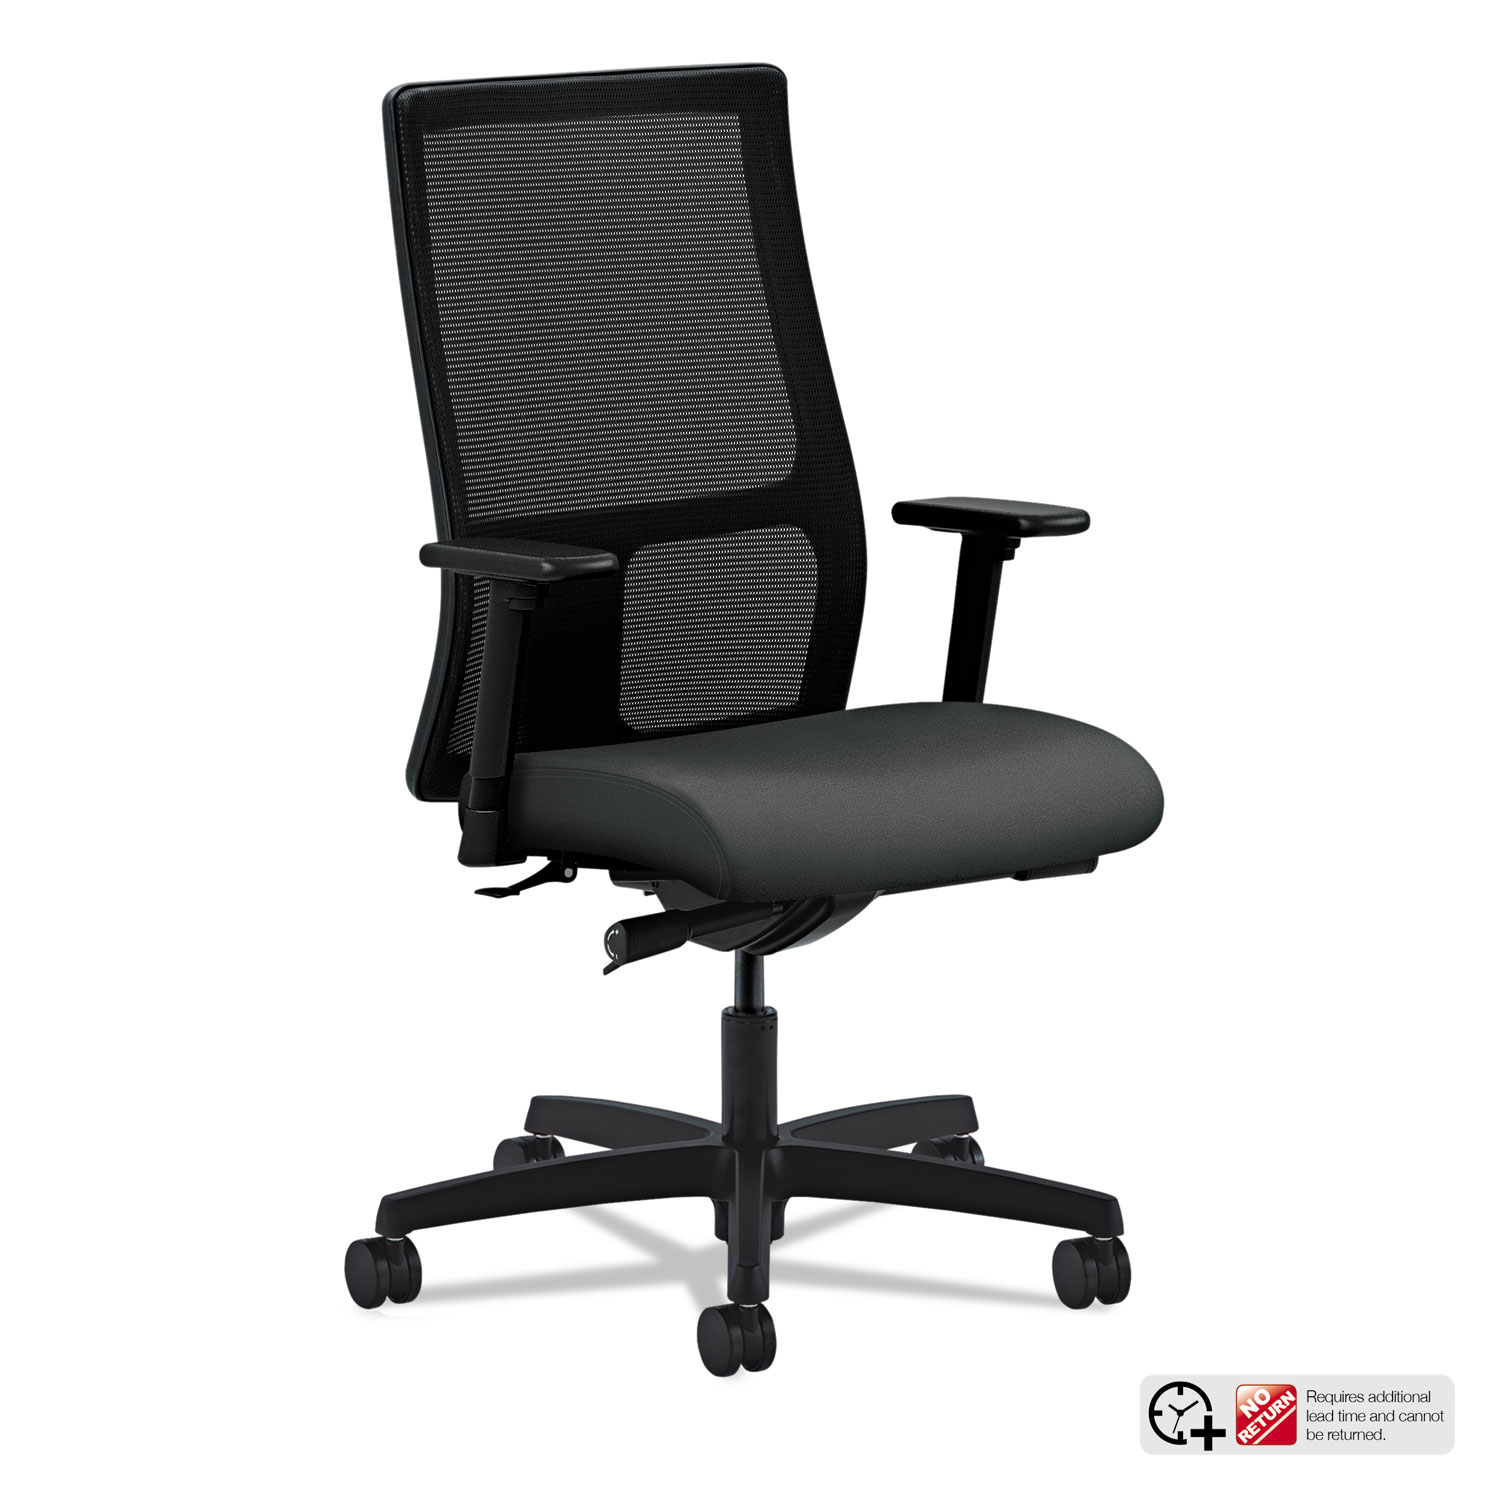  HON HIWM2.A.H.M.CU19.T.SB Ignition Series Mesh Mid-Back Work Chair, Supports up to 300 lbs., Iron Ore Seat/Black Back, Black Base (HONIW103CU19) 